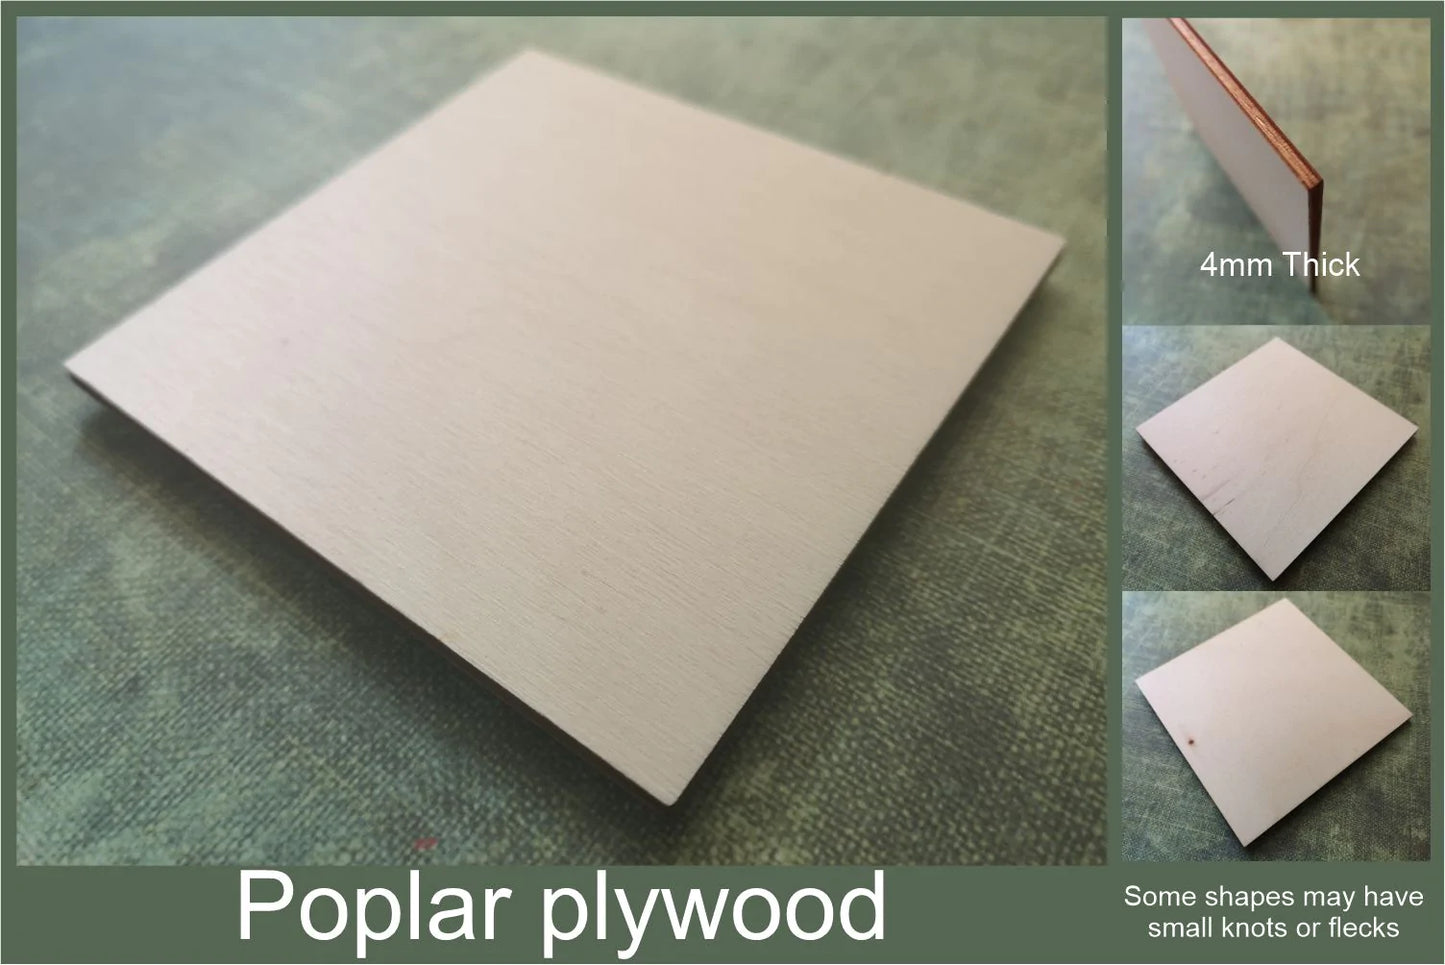 4mm thick poplar plywood used to make the Boxer cut-outs ready for crafting